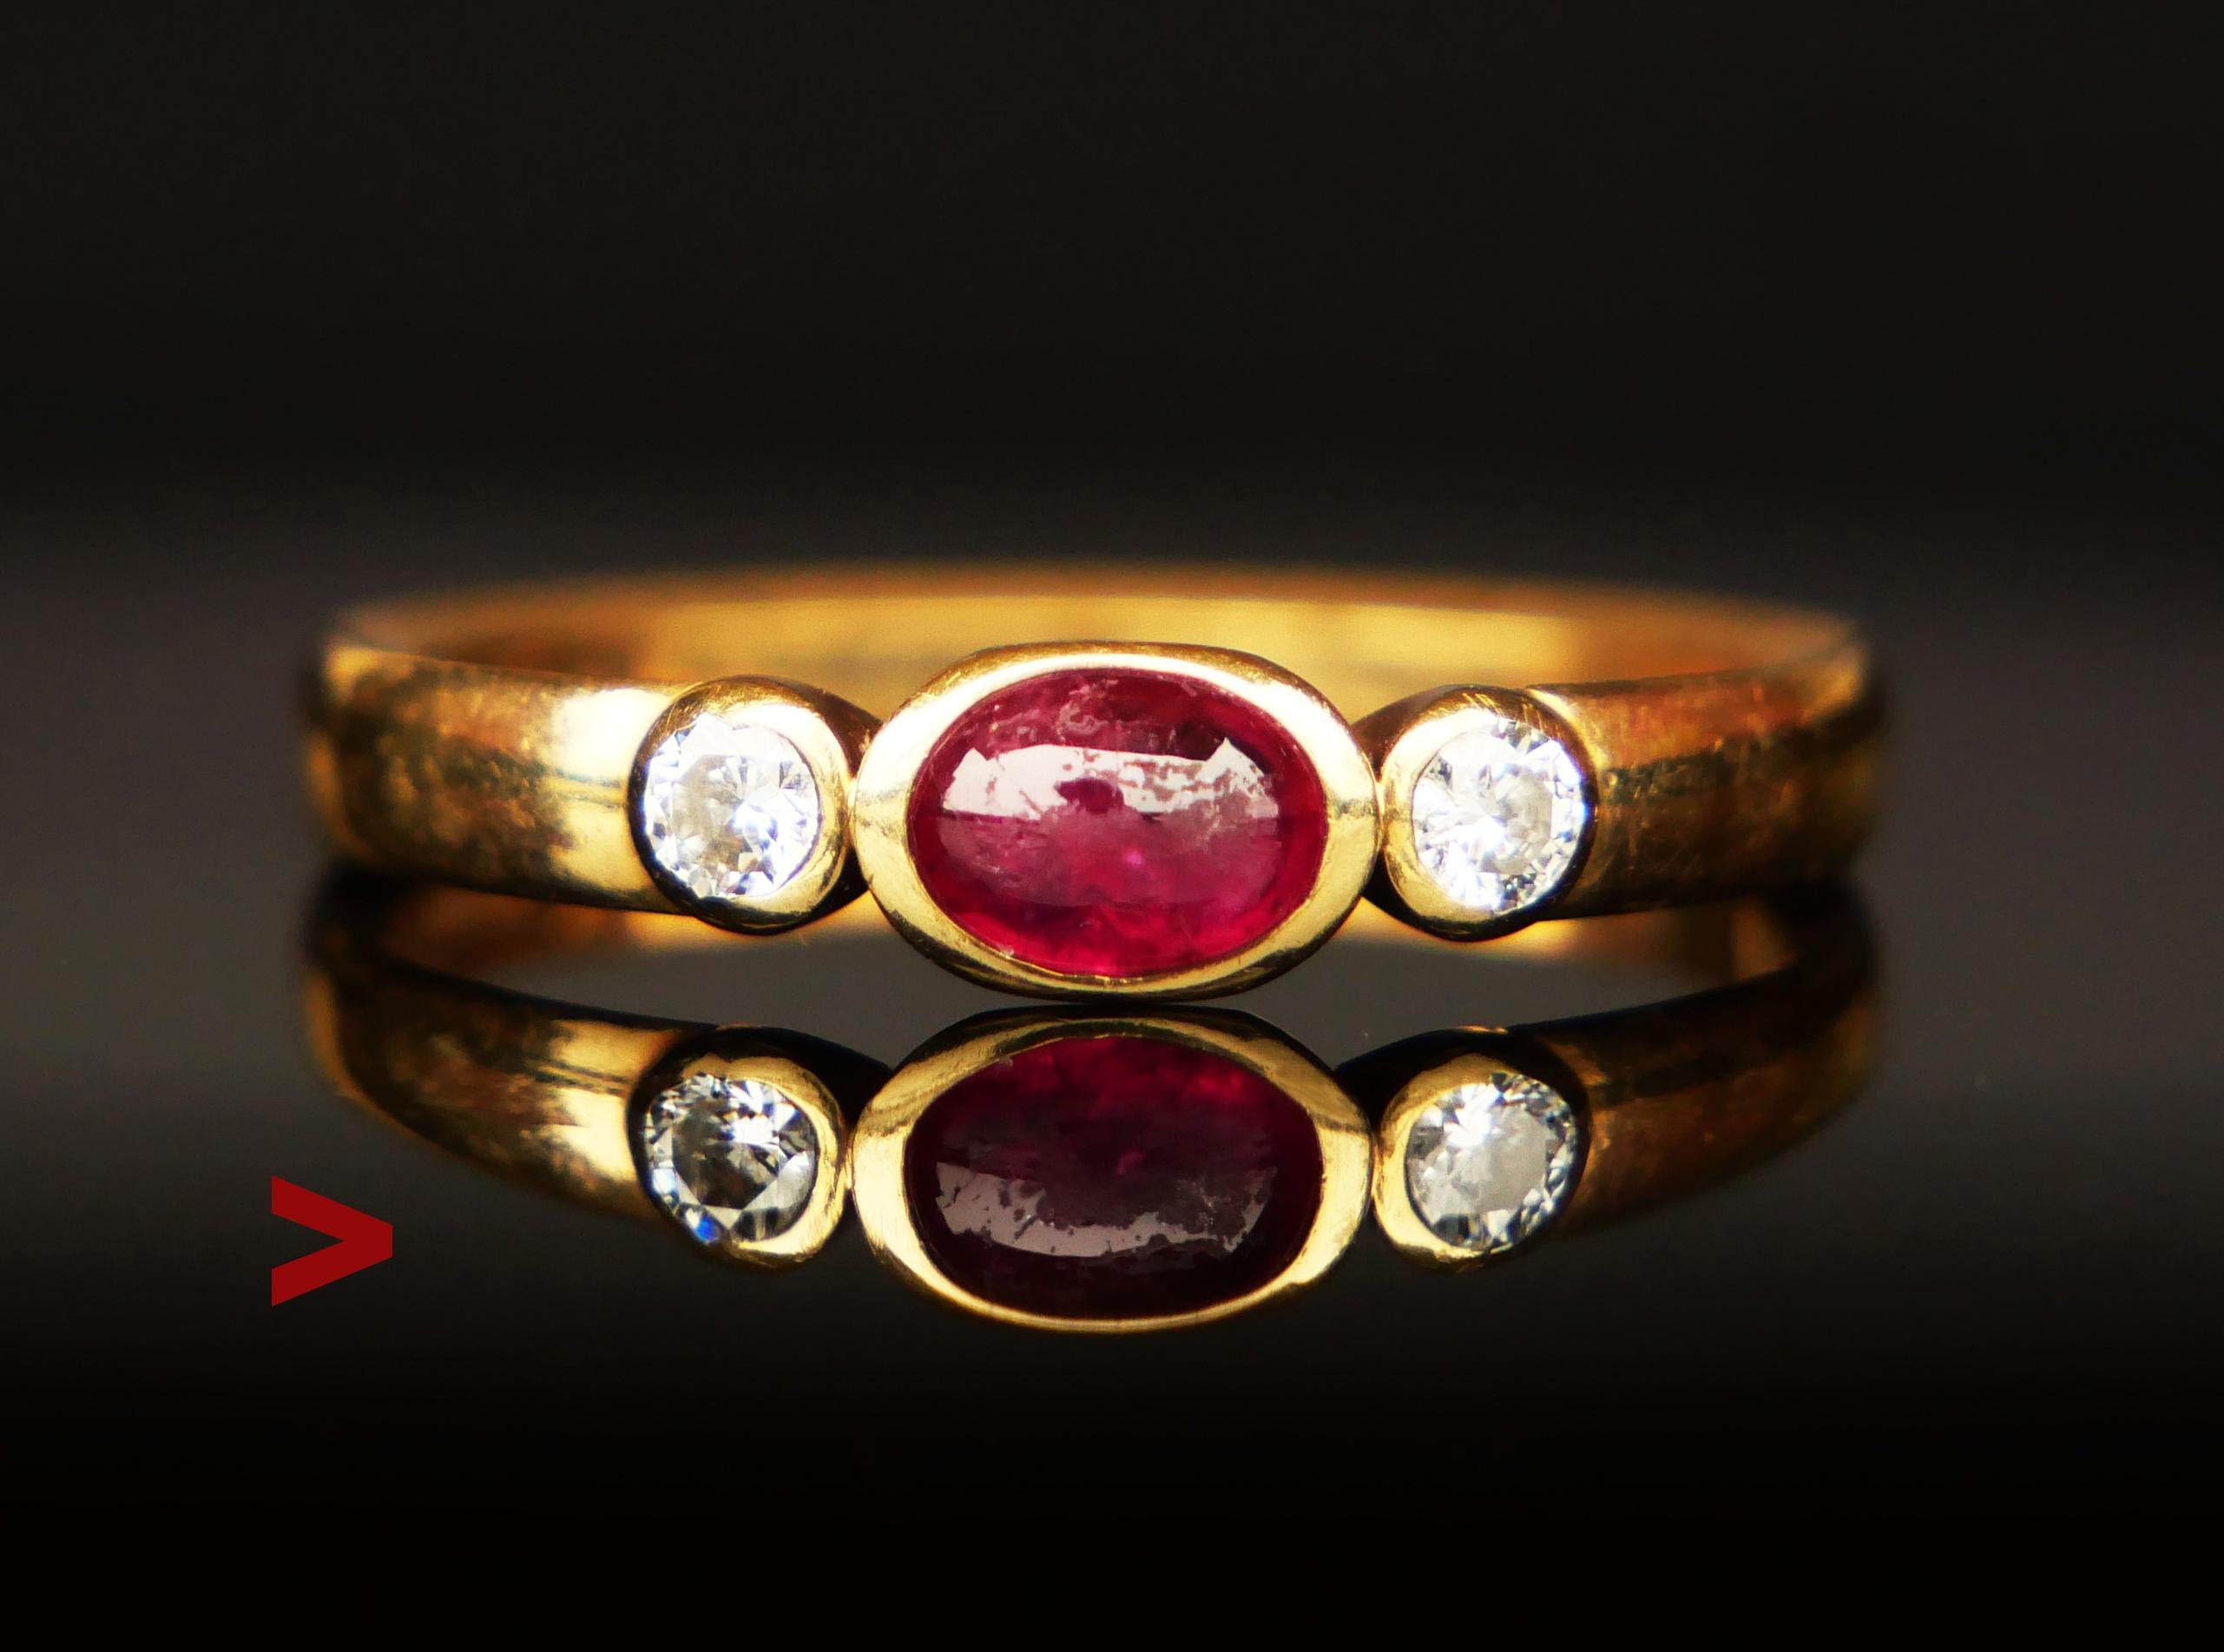 Beautiful Three Stones Ruby and Diamonds Ring hand-made in Germany ca. 1920s - 1930s.

Hallmarks of German maker, 585.

Cabochon cut natural Ruby 5.7 mm x 4.5 mm x 2.5 mm deep / ca.0.7 ct.

Two natural old European cut Diamonds Ø 2.5 mm x 1.5 mm